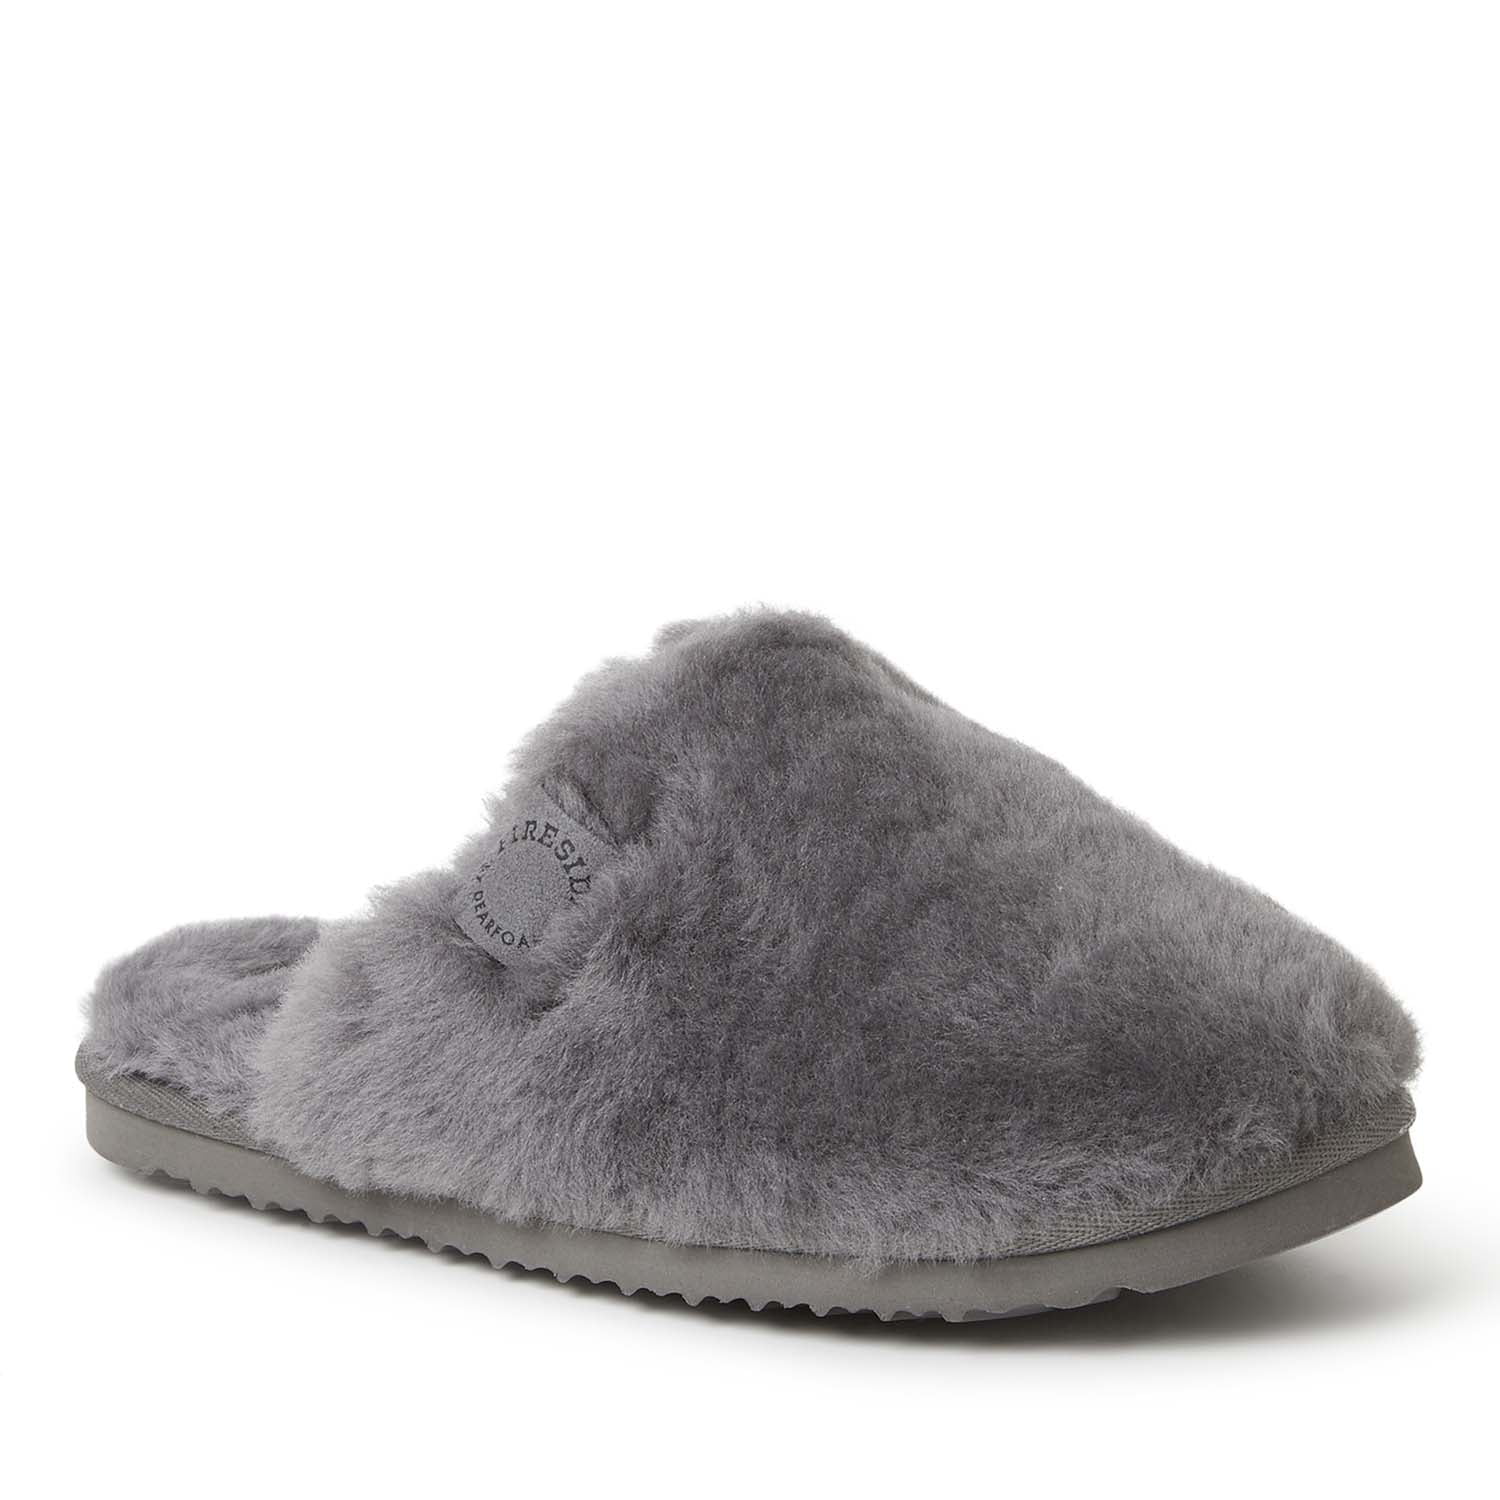 Affordable And Stylish Walmart Shearling Slippers | HuffPost Life